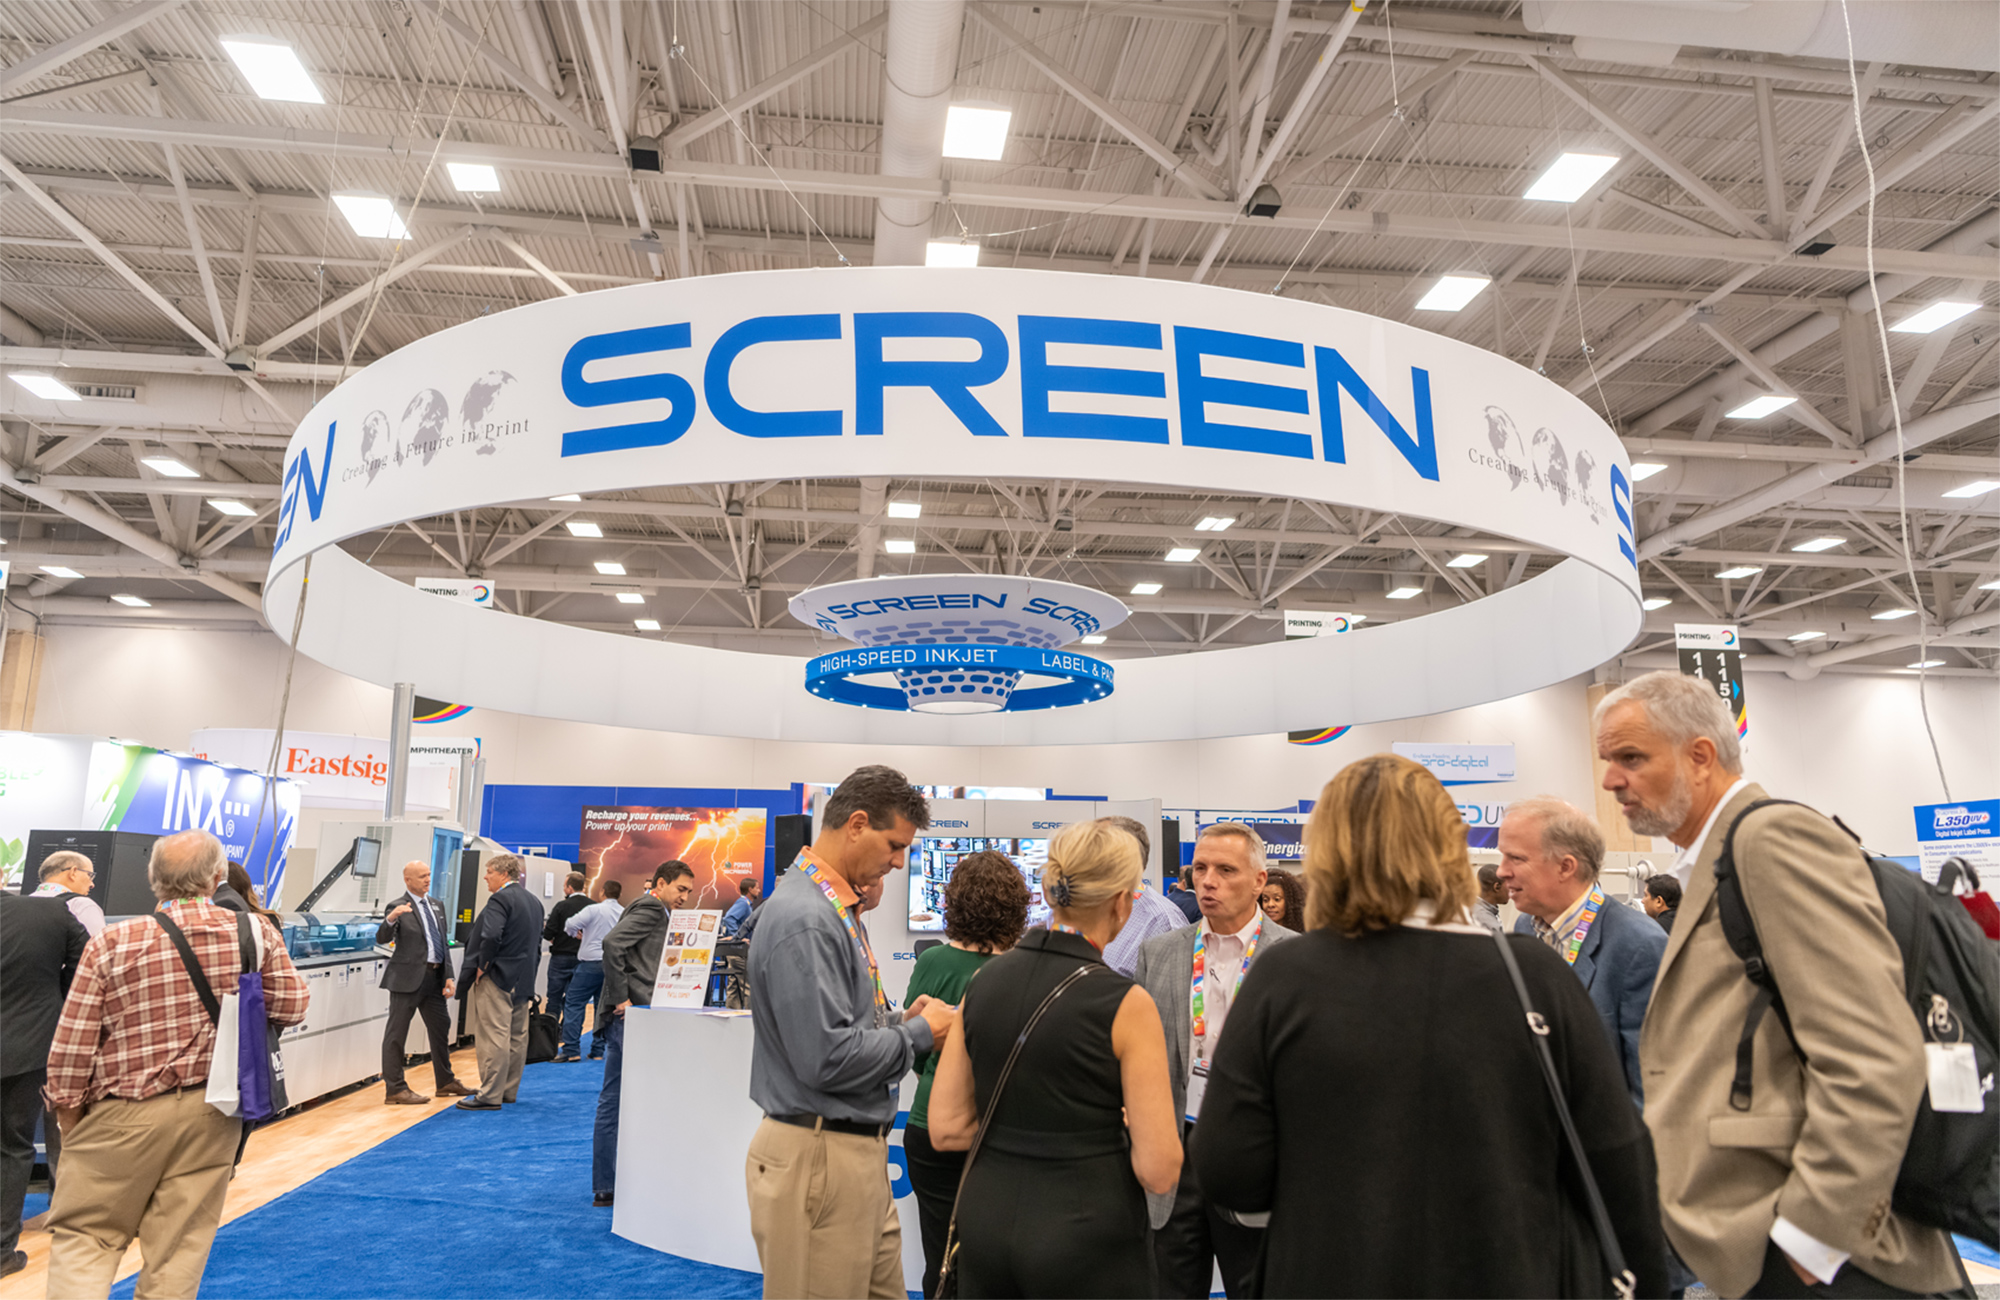 1500, 1501, 1502, 1503… SCREEN Truepress Jet520 inkjet engines and counting, all celebrated at the inaugural Printing United show